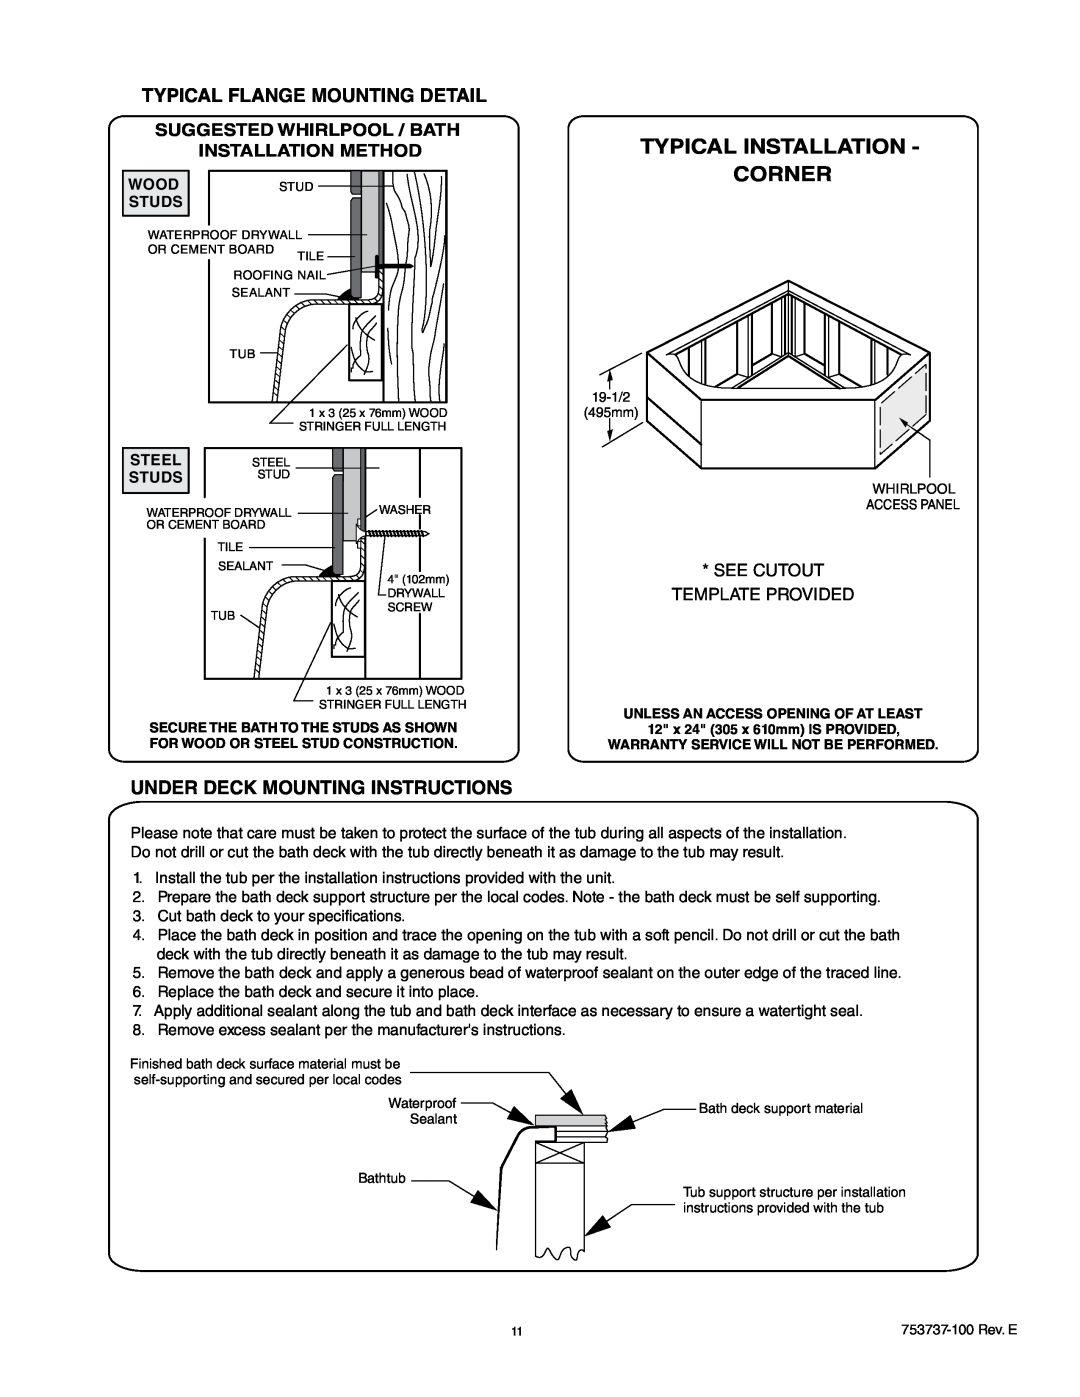 American Standard 2908L Typical Installation Corner, Typical Flange Mounting Detail, Under Deck Mounting Instructions 